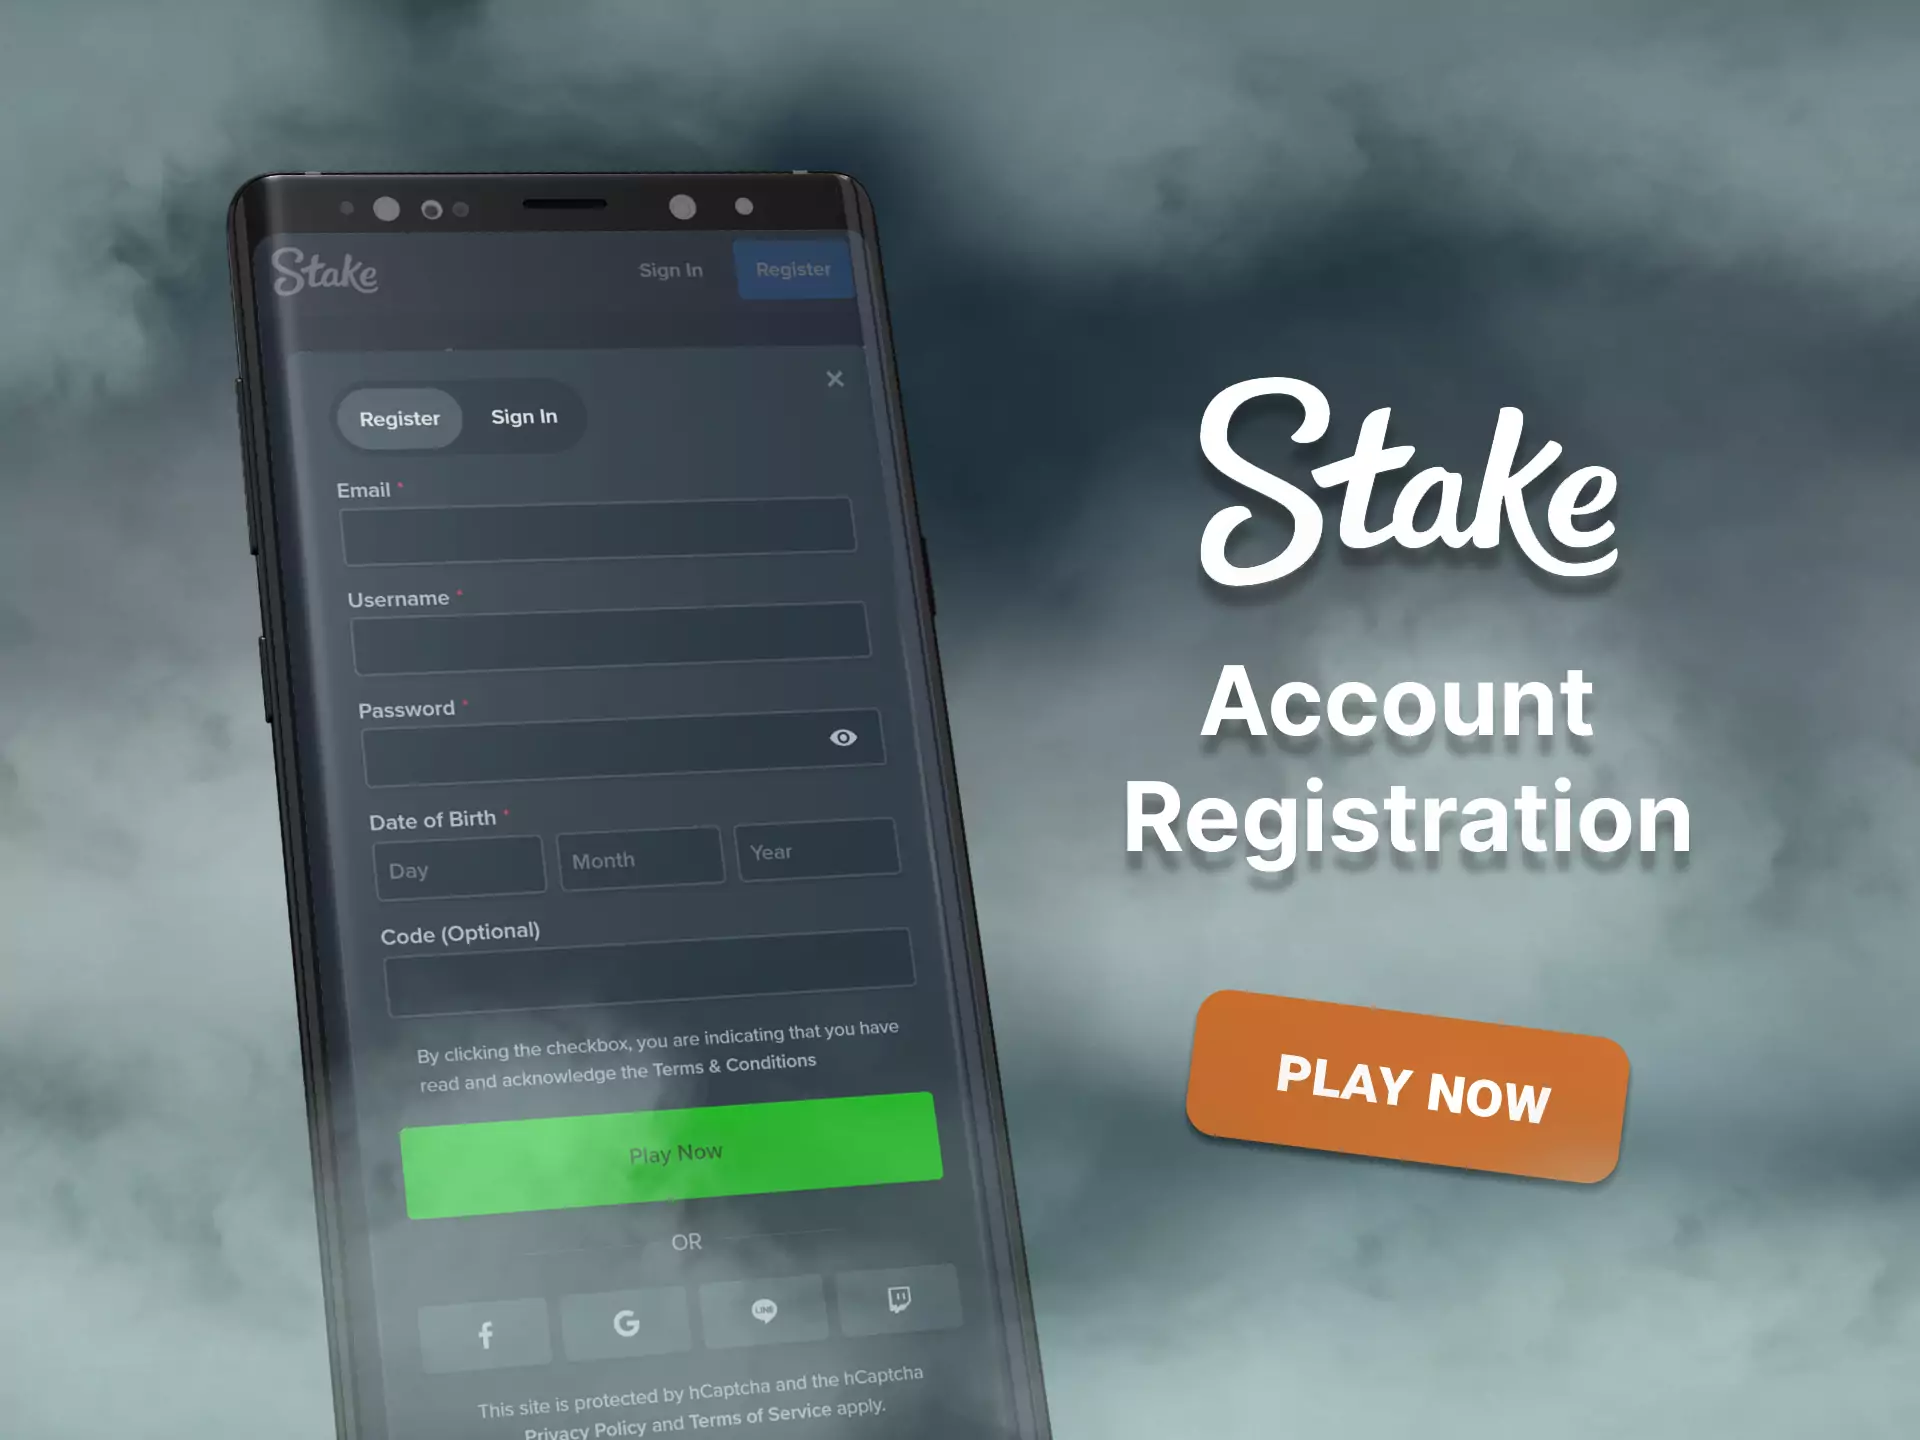 Go through a simple registration and play with Stake.com.